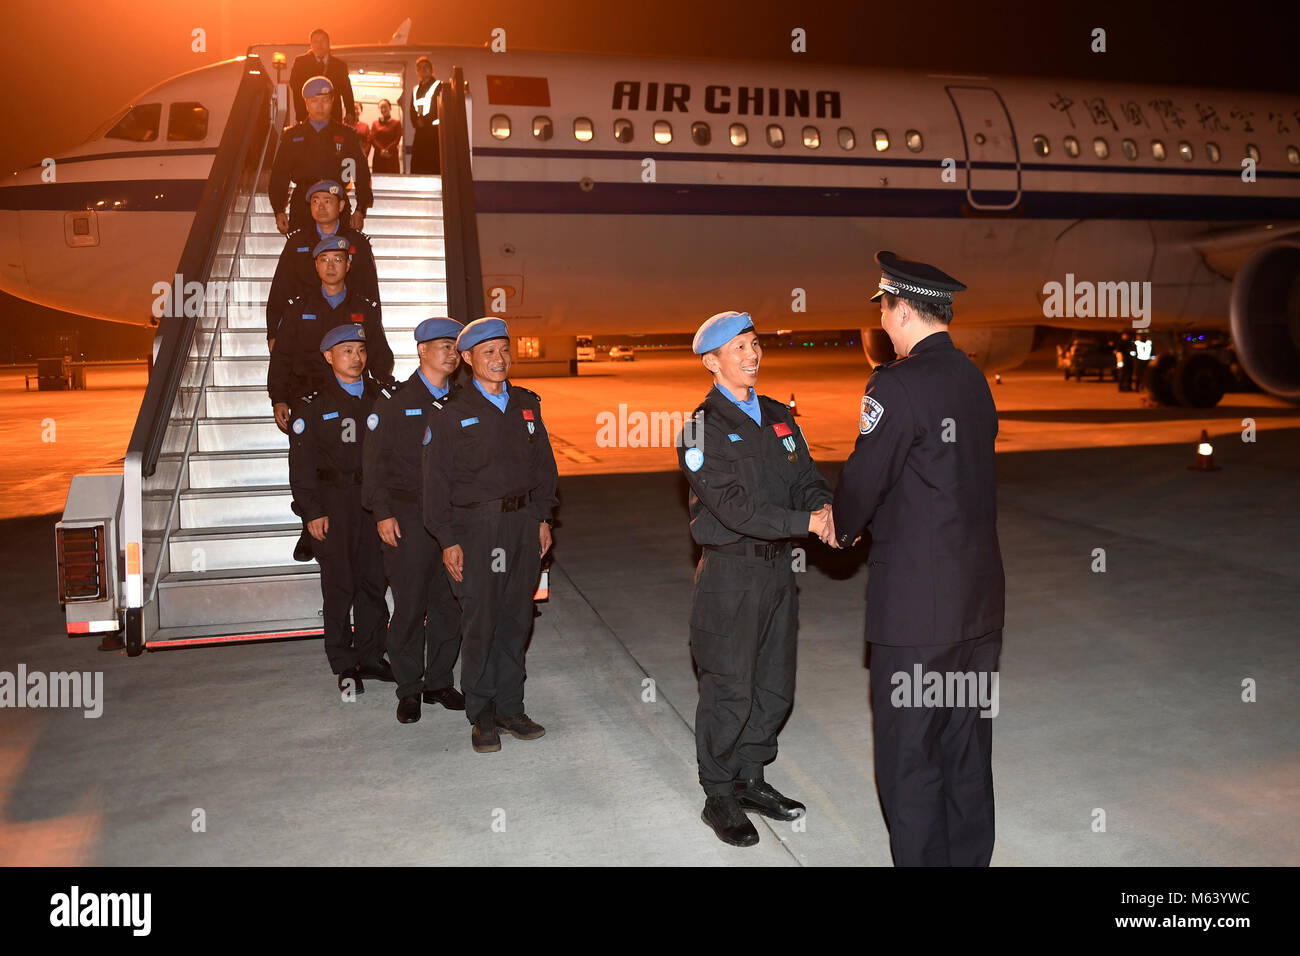 (180228) -- HANGZHOU, Feb. 28, 2018 (Xinhua) -- Seven Chinese peacekeepers arrive at the Hangzhou Xiaoshan International Airport in Hangzhou, capital of east China's Zhejiang Province, Feb. 27, 2018, after conducting a one-year mission in South Sudan. The sixth team of Chinese peacekeeping police to South Sudan, with the seven members all selected from Zhejiang, arrived in Hangzhou Tuesday evening. In South Sudan, the police officers fulfilled a variety of tasks in the capital Juba and Wau, including patrols of refugee camps, humanitarian aid and community-based police services. (Xinhua/Huang Stock Photo